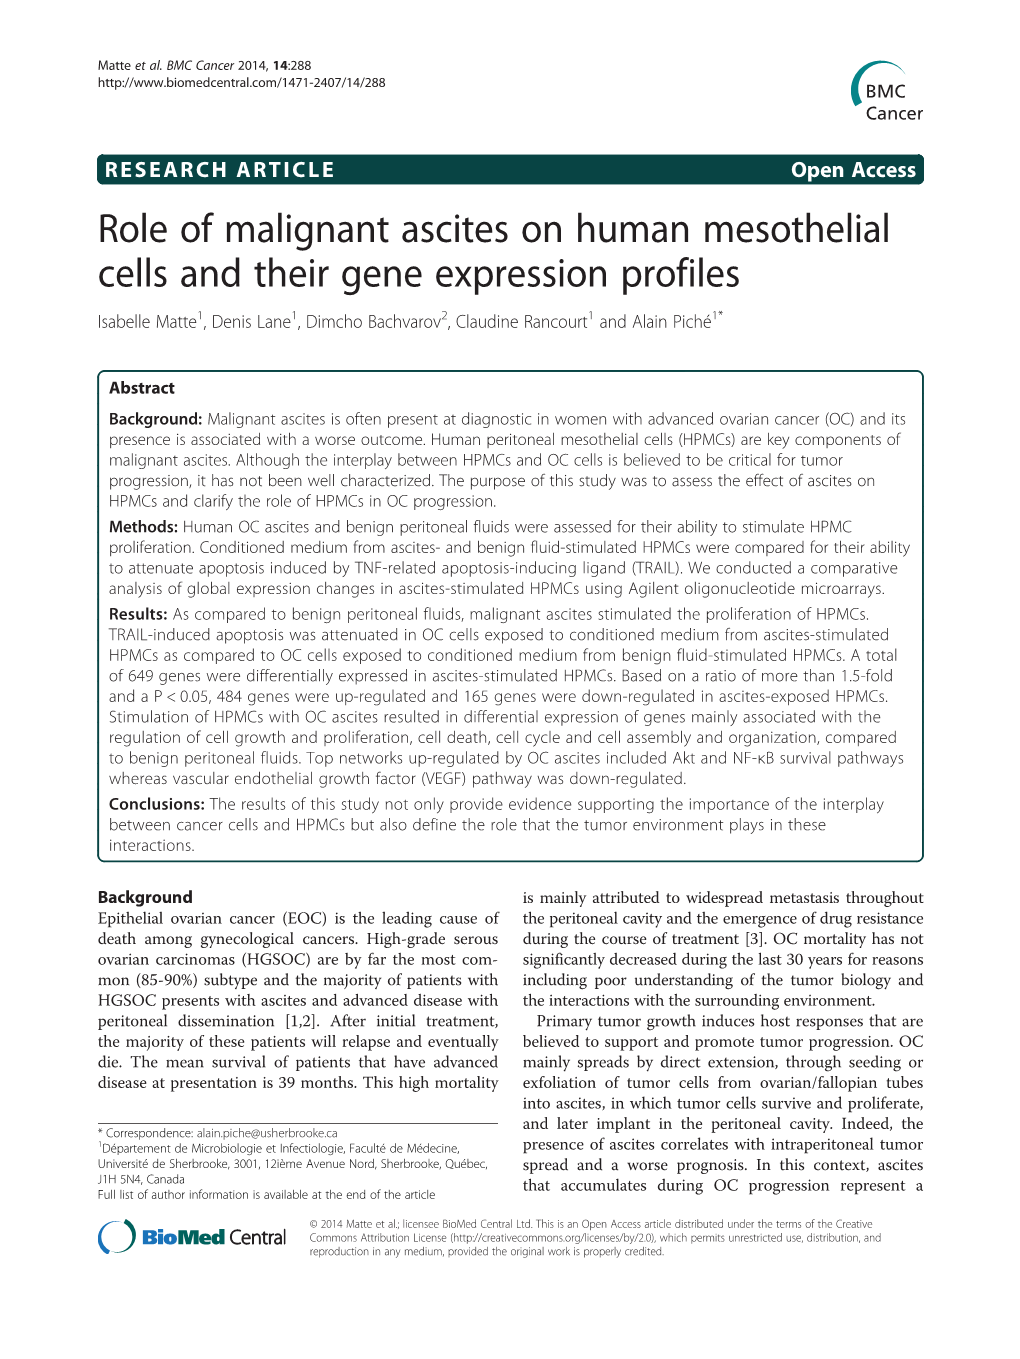 Role of Malignant Ascites on Human Mesothelial Cells and Their Gene